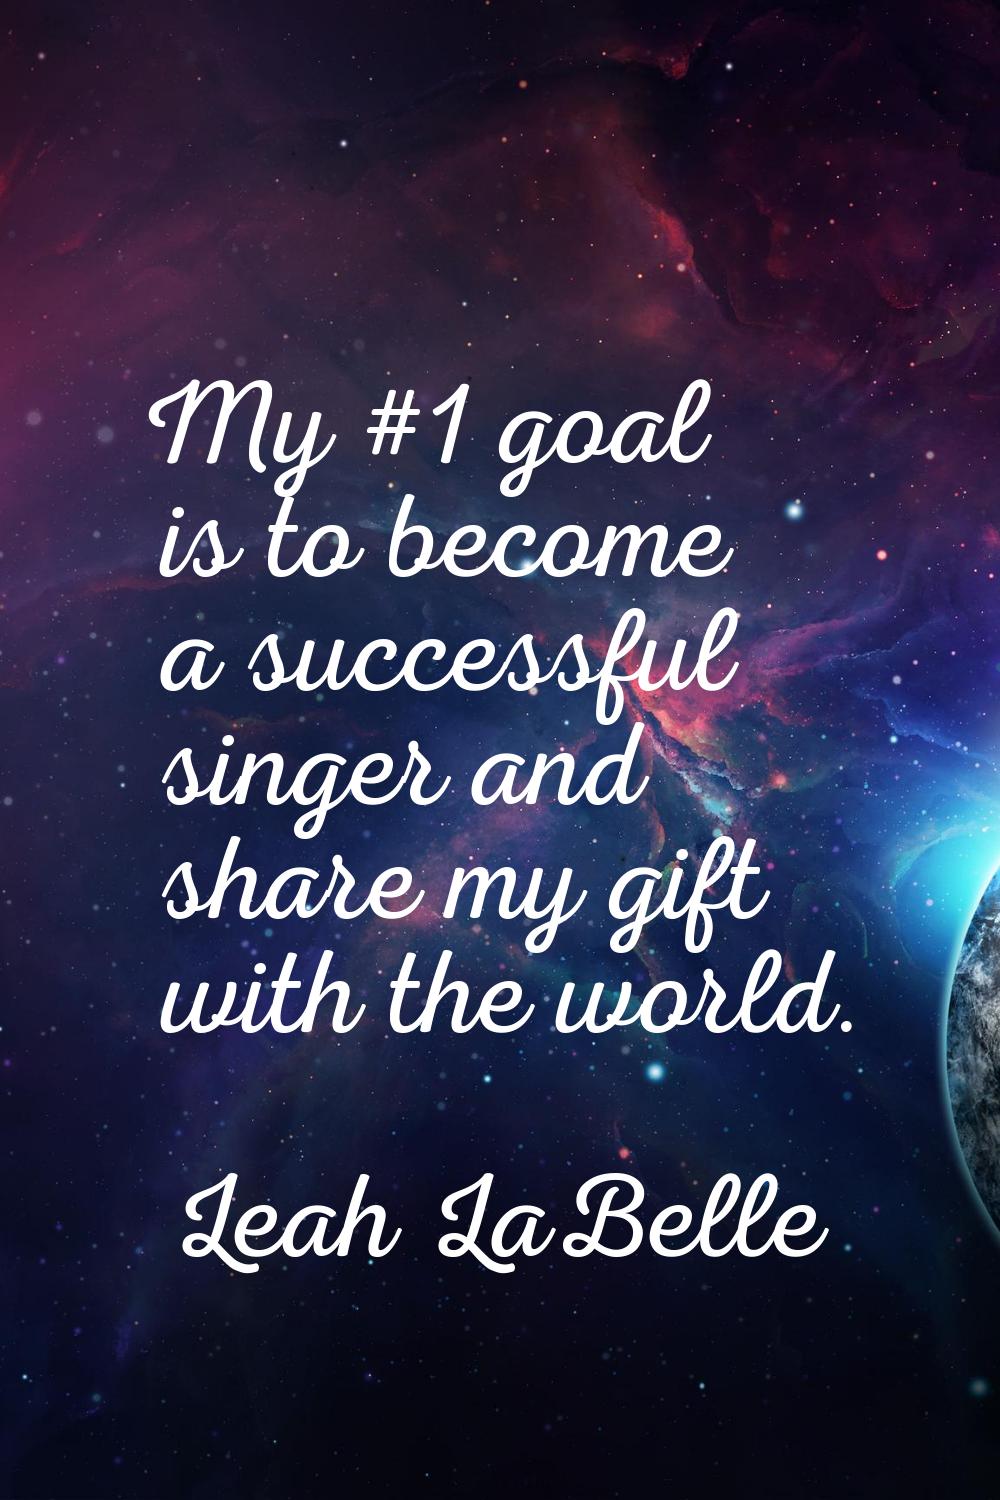 My #1 goal is to become a successful singer and share my gift with the world.